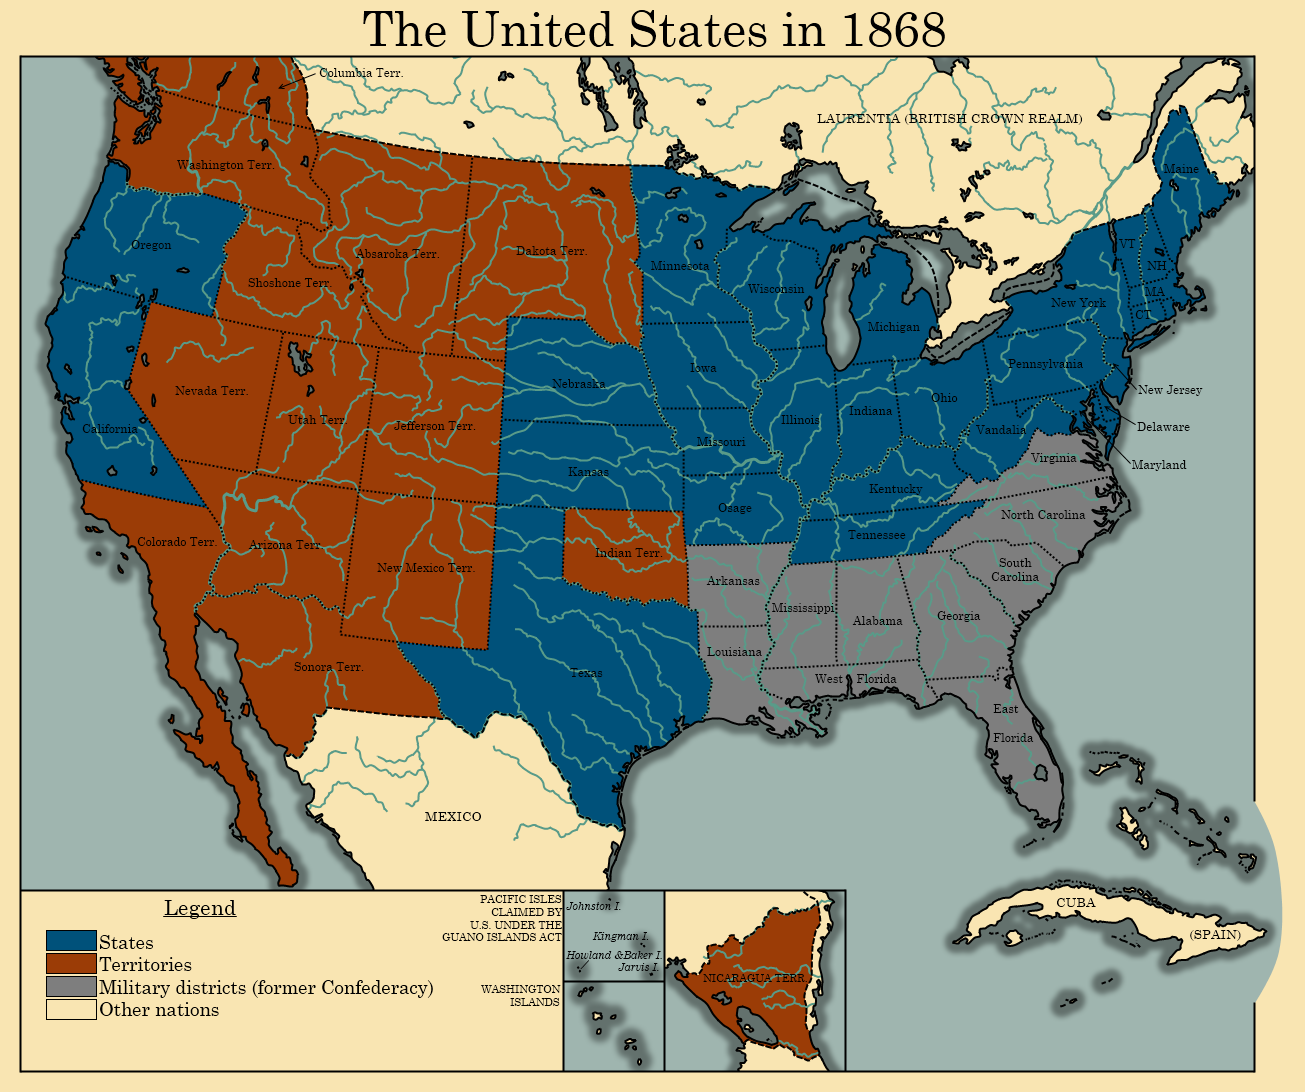 the_united_states_in_1868_by_thearesproject-d5cymmx.png